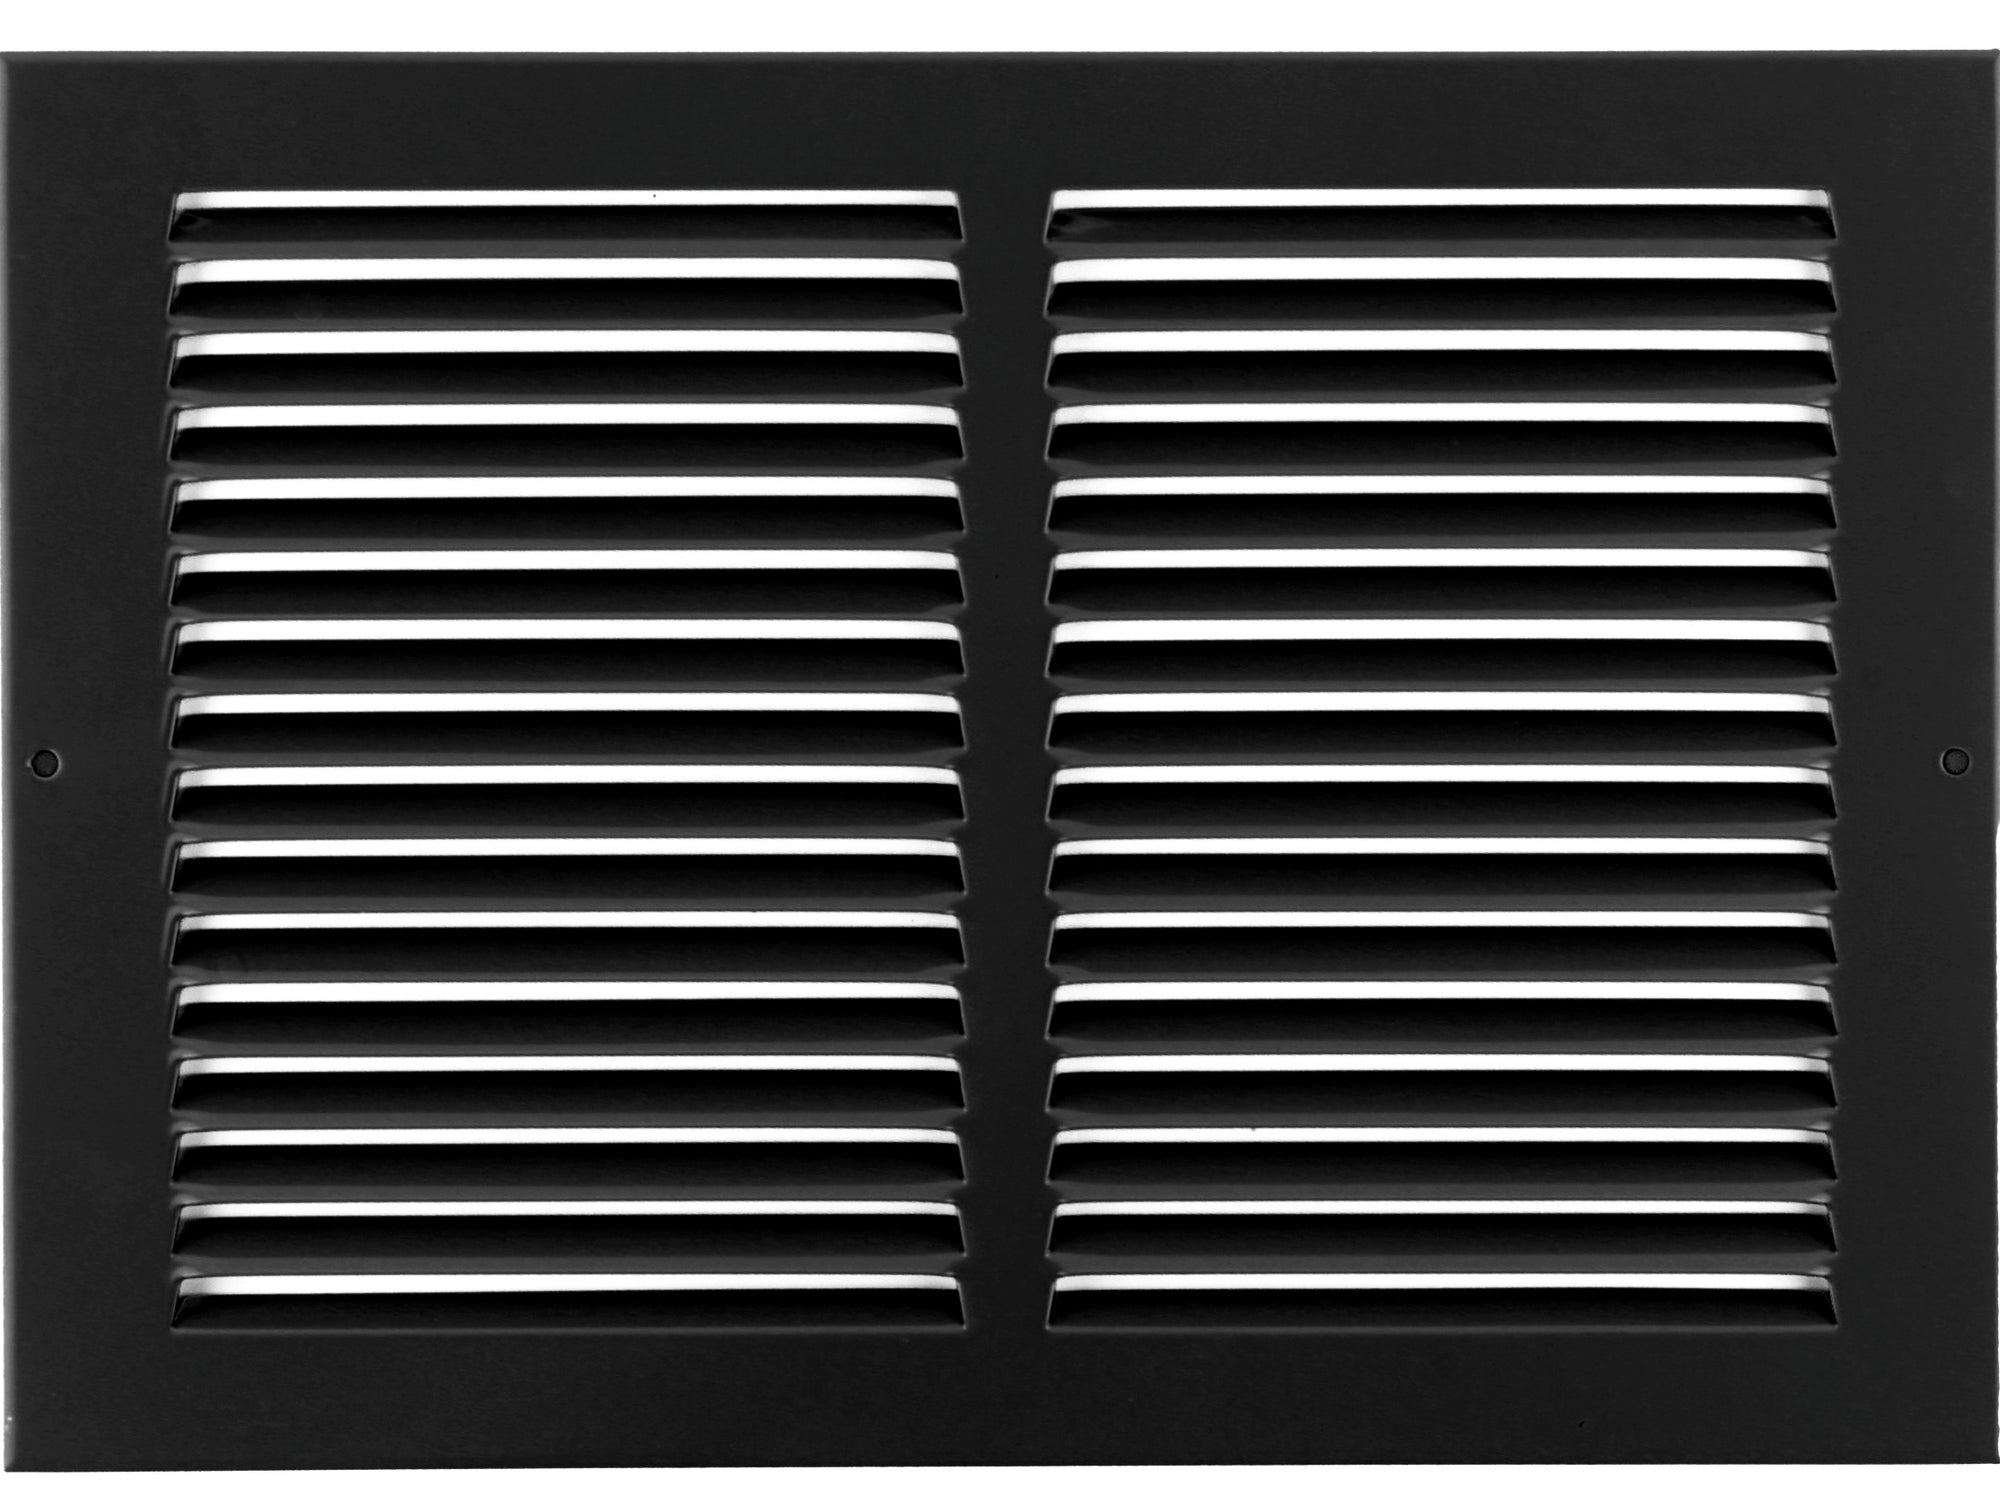 12" X 6" Air Vent Return Grilles - Sidewall and Ceiling - Steel